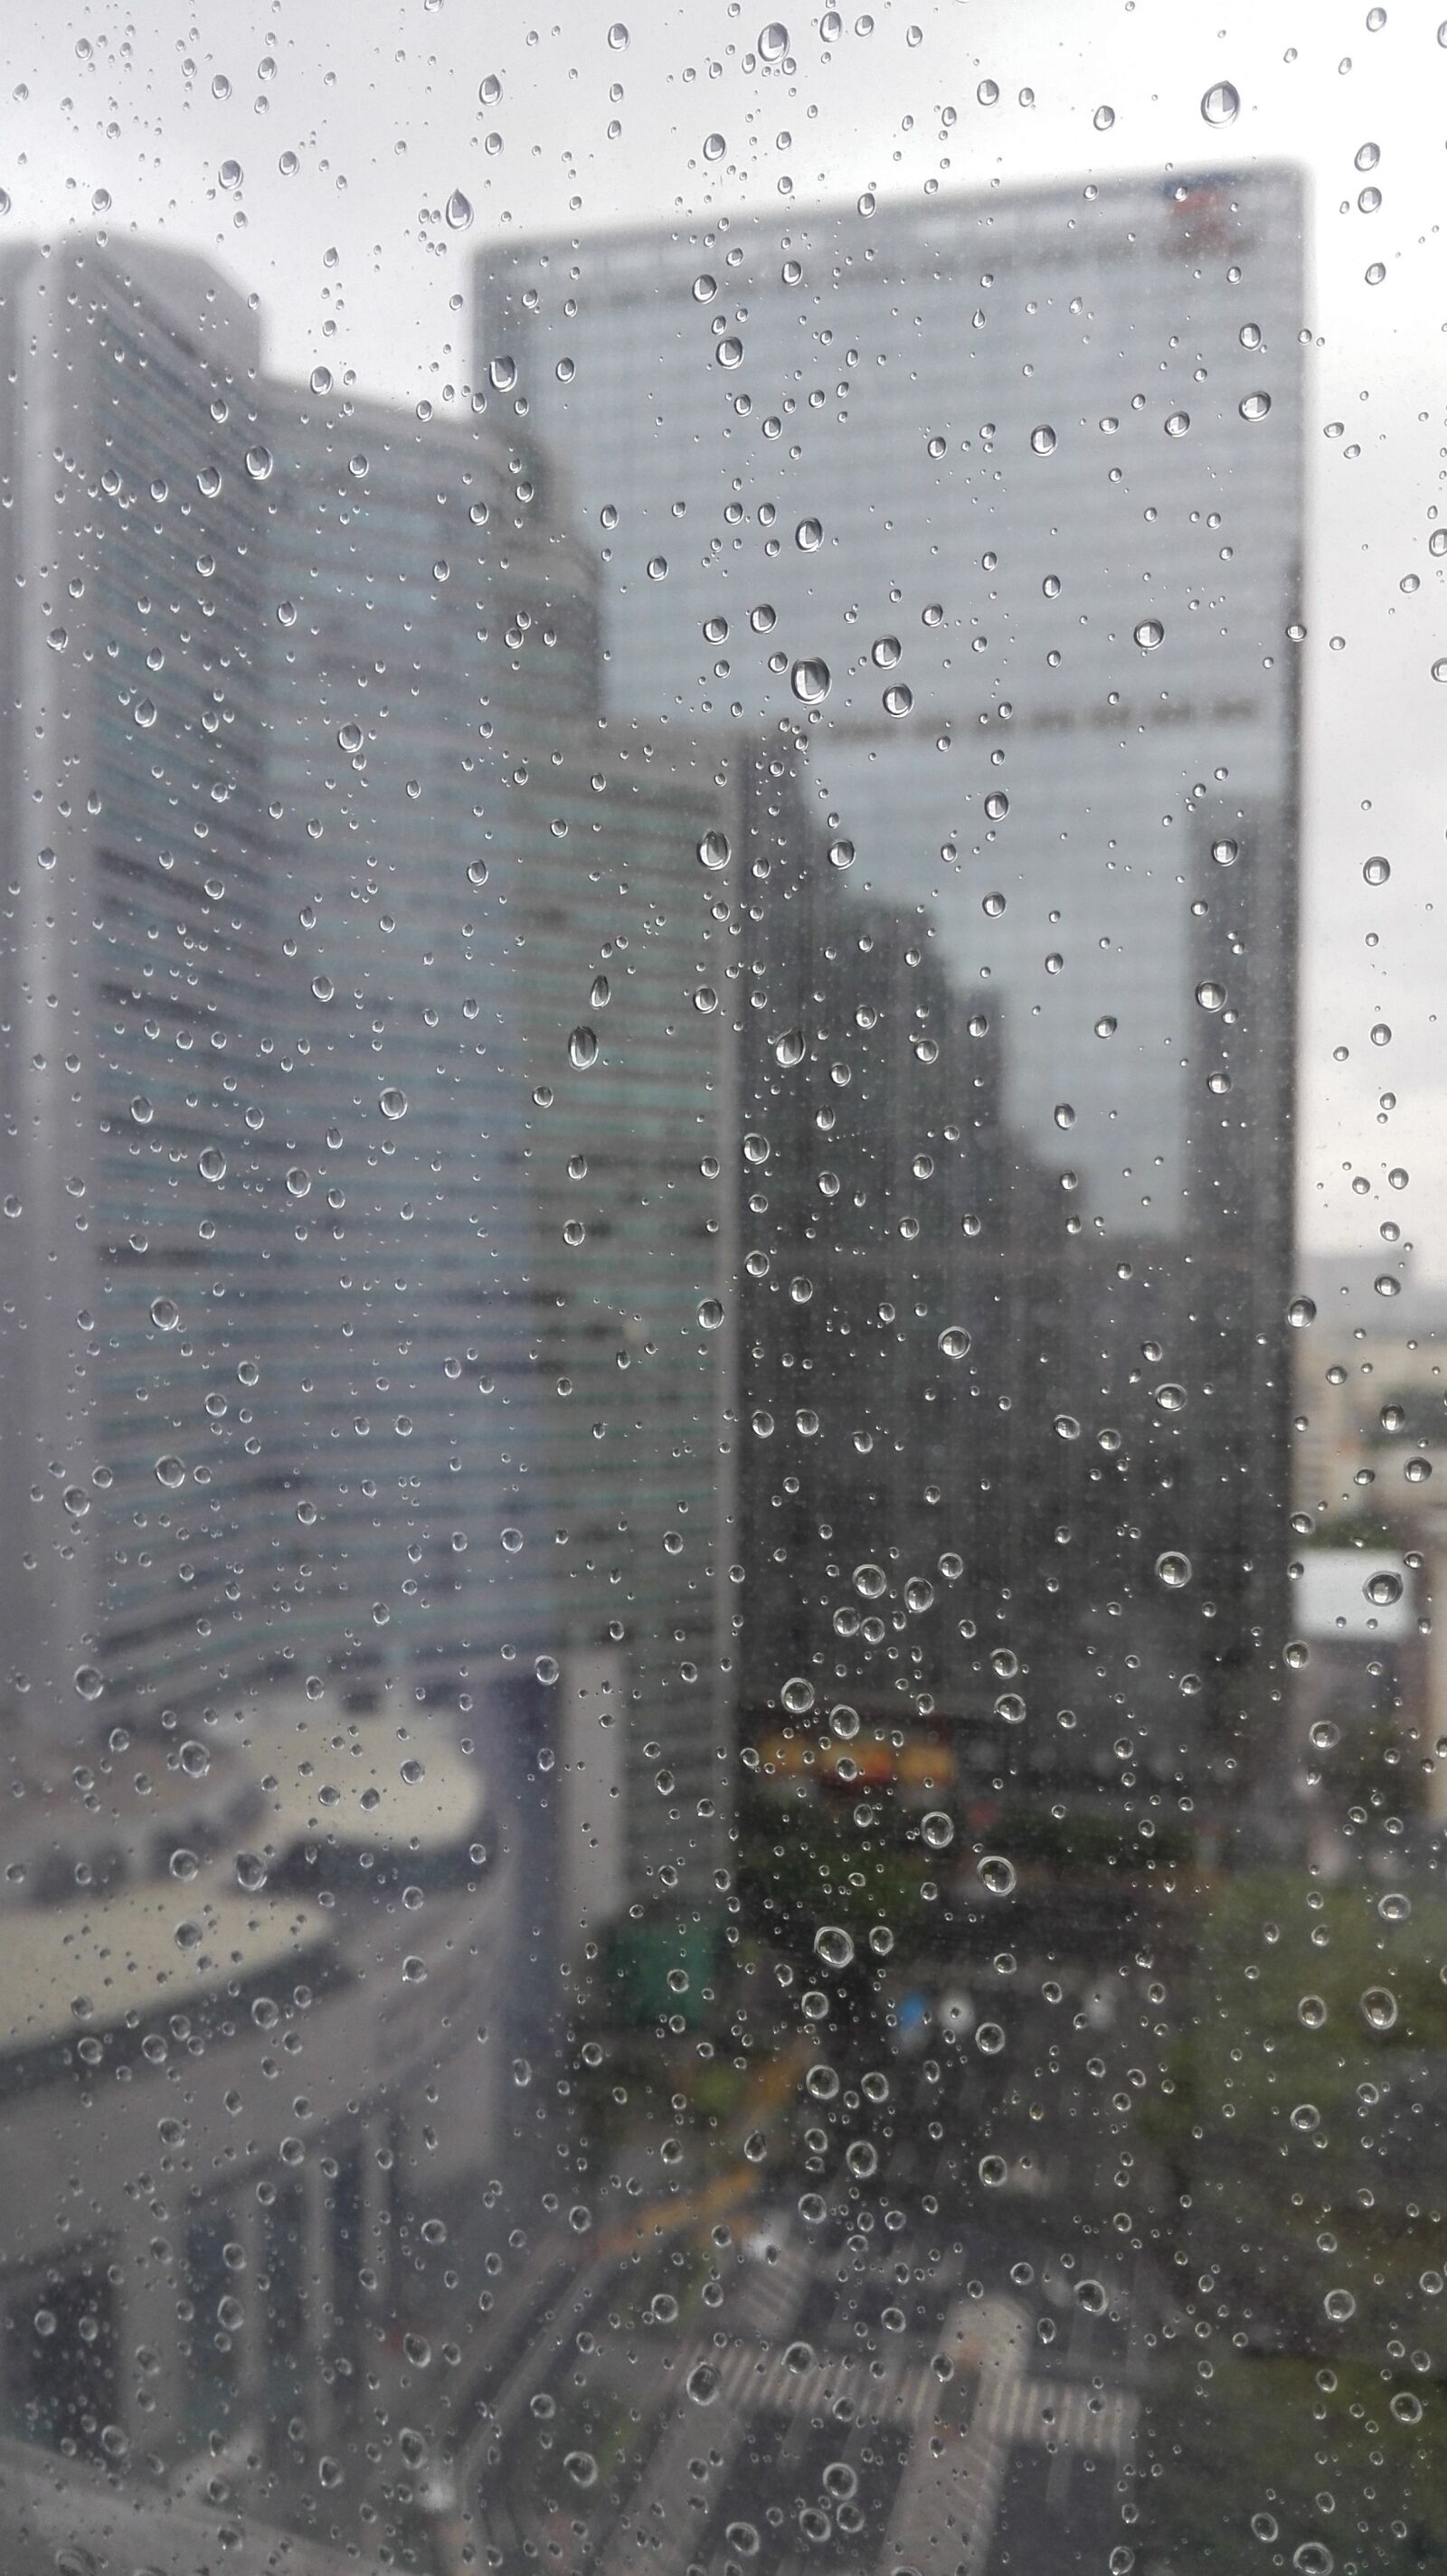 HUAWEI P7-L09 sample photo. Rain in the city photography